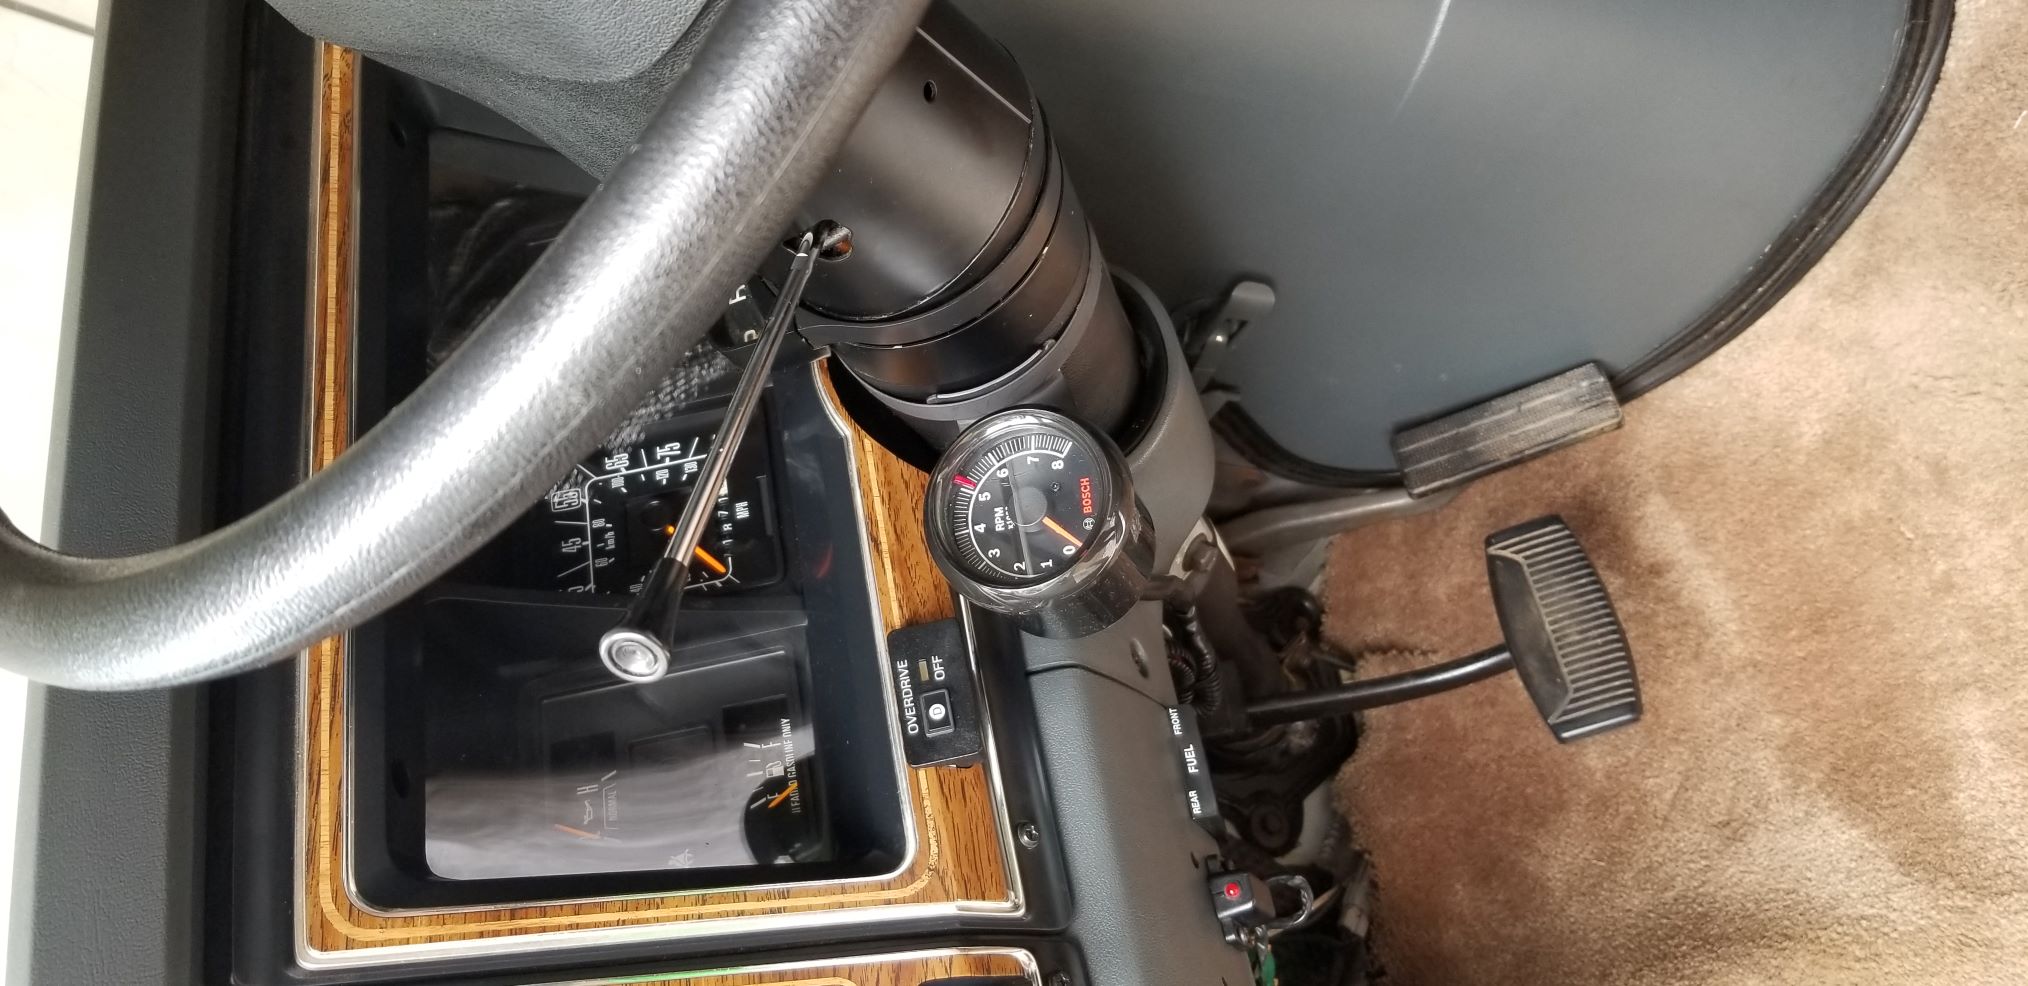 I wasn't brave enough to drill through the steering column so I painted a hose clamp black and mounted it. Doesn't seem like it will fall off but time will tell.